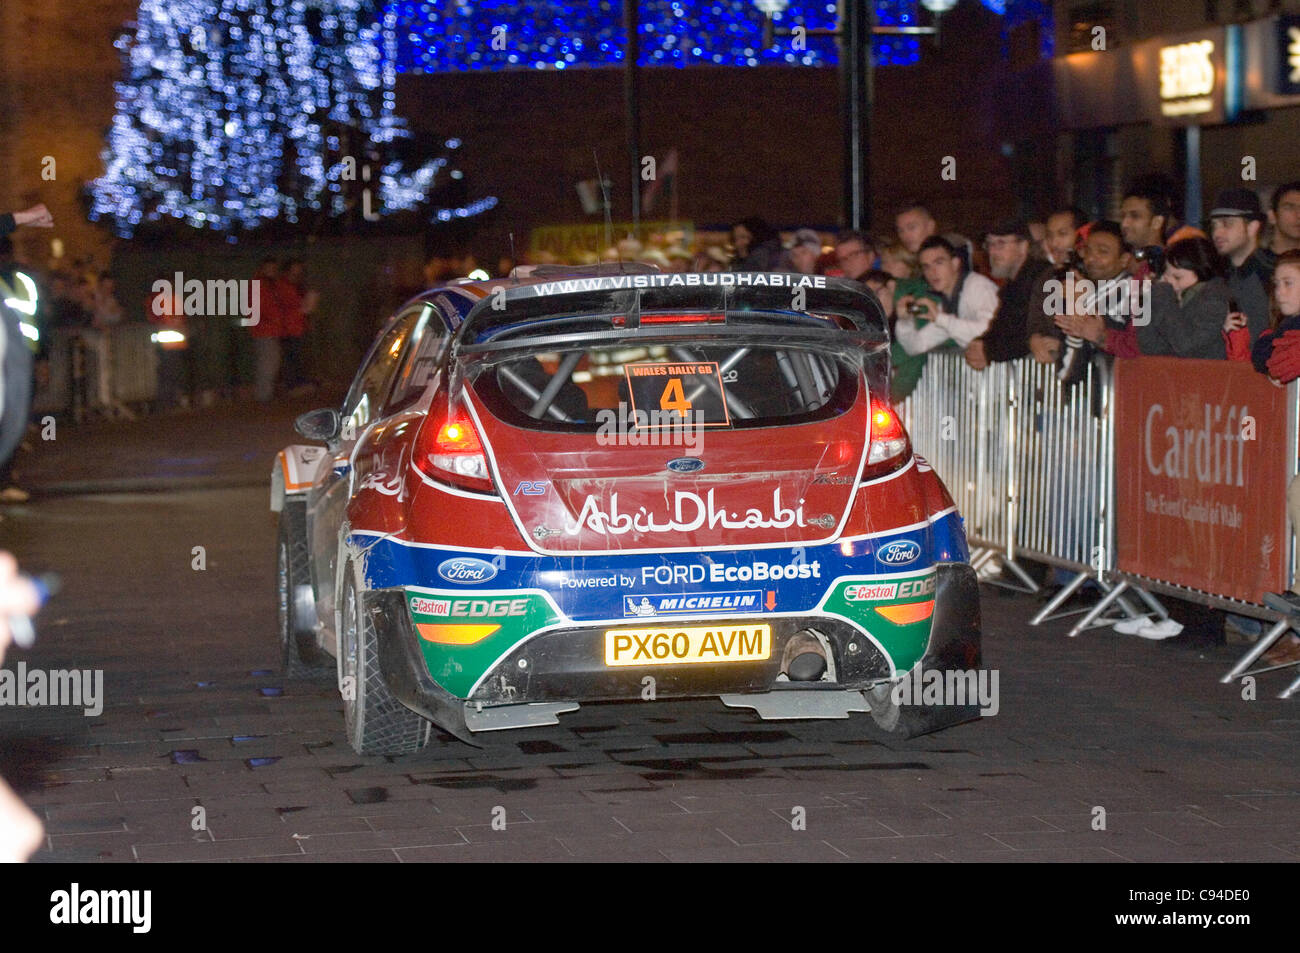 Jari-Matti Latvala (Finland) and his co-Driver Mikka Anttila (Finland) in their Ford Abu Dhabi World Rally Team Ford Fiesta RS WRC making their way through the centre of Cardiiff tonight on day 3 of the FIA WRC Wales Rally GB. Stock Photo